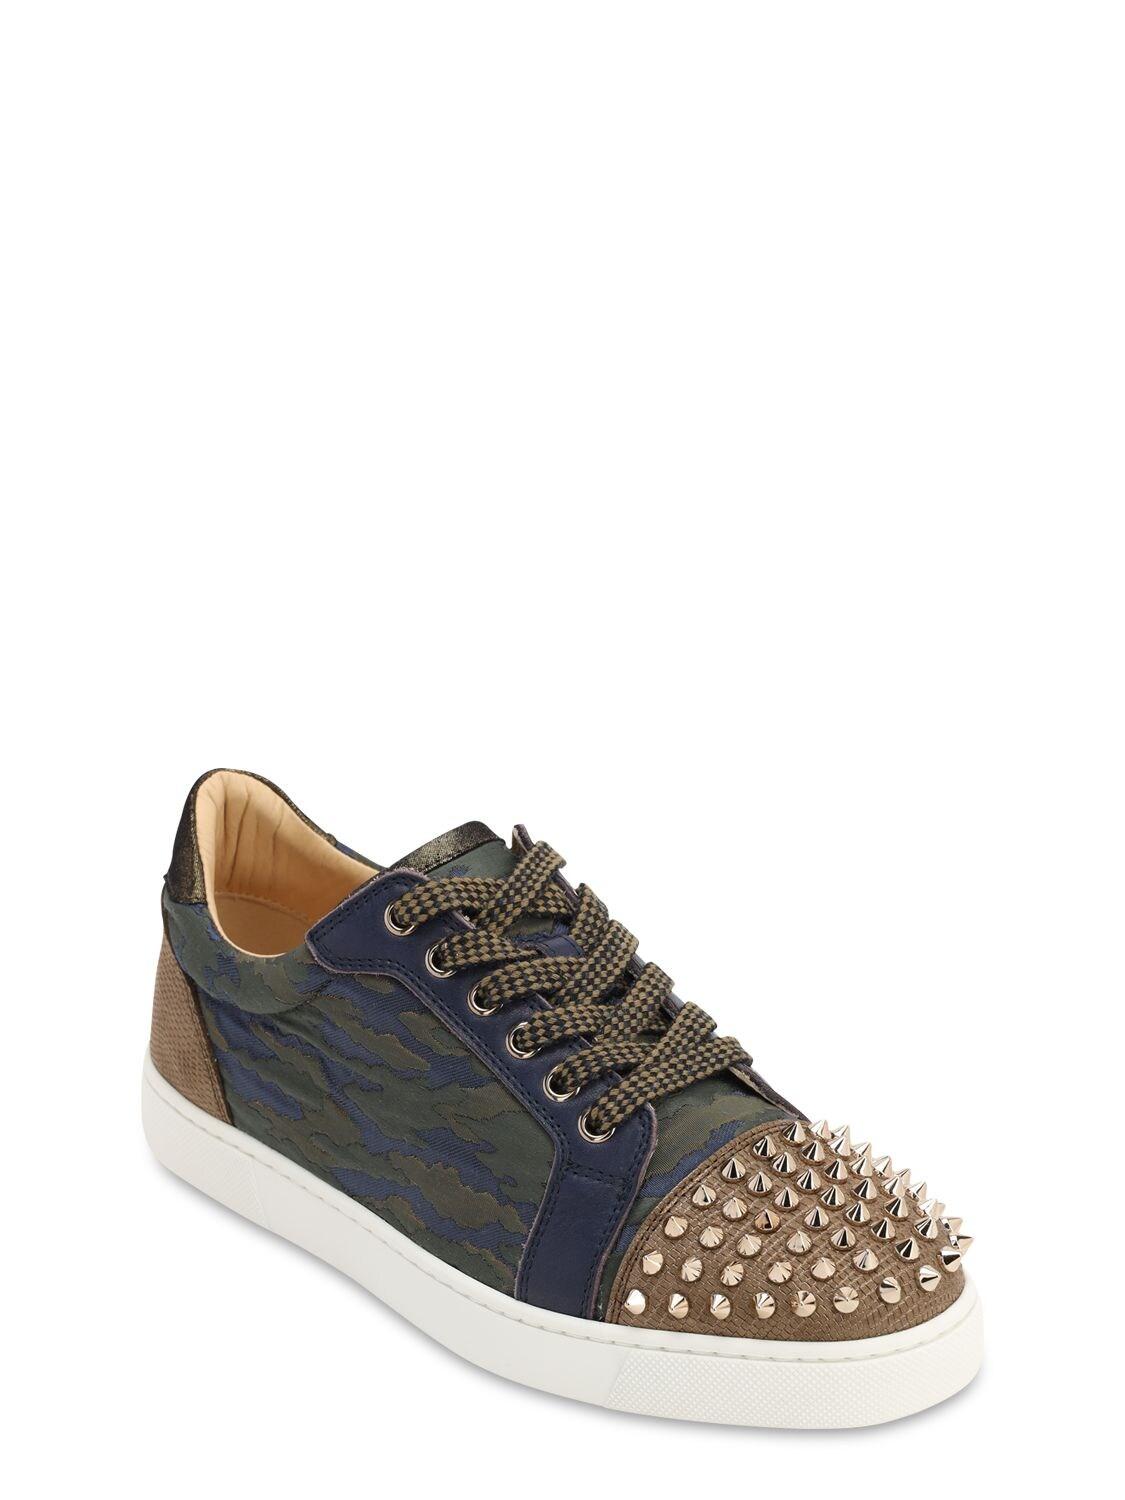 Christian Louboutin Leather 20mm Vieira Spiked Camouflage Sneakers in  Blue/Green (Blue) | Lyst